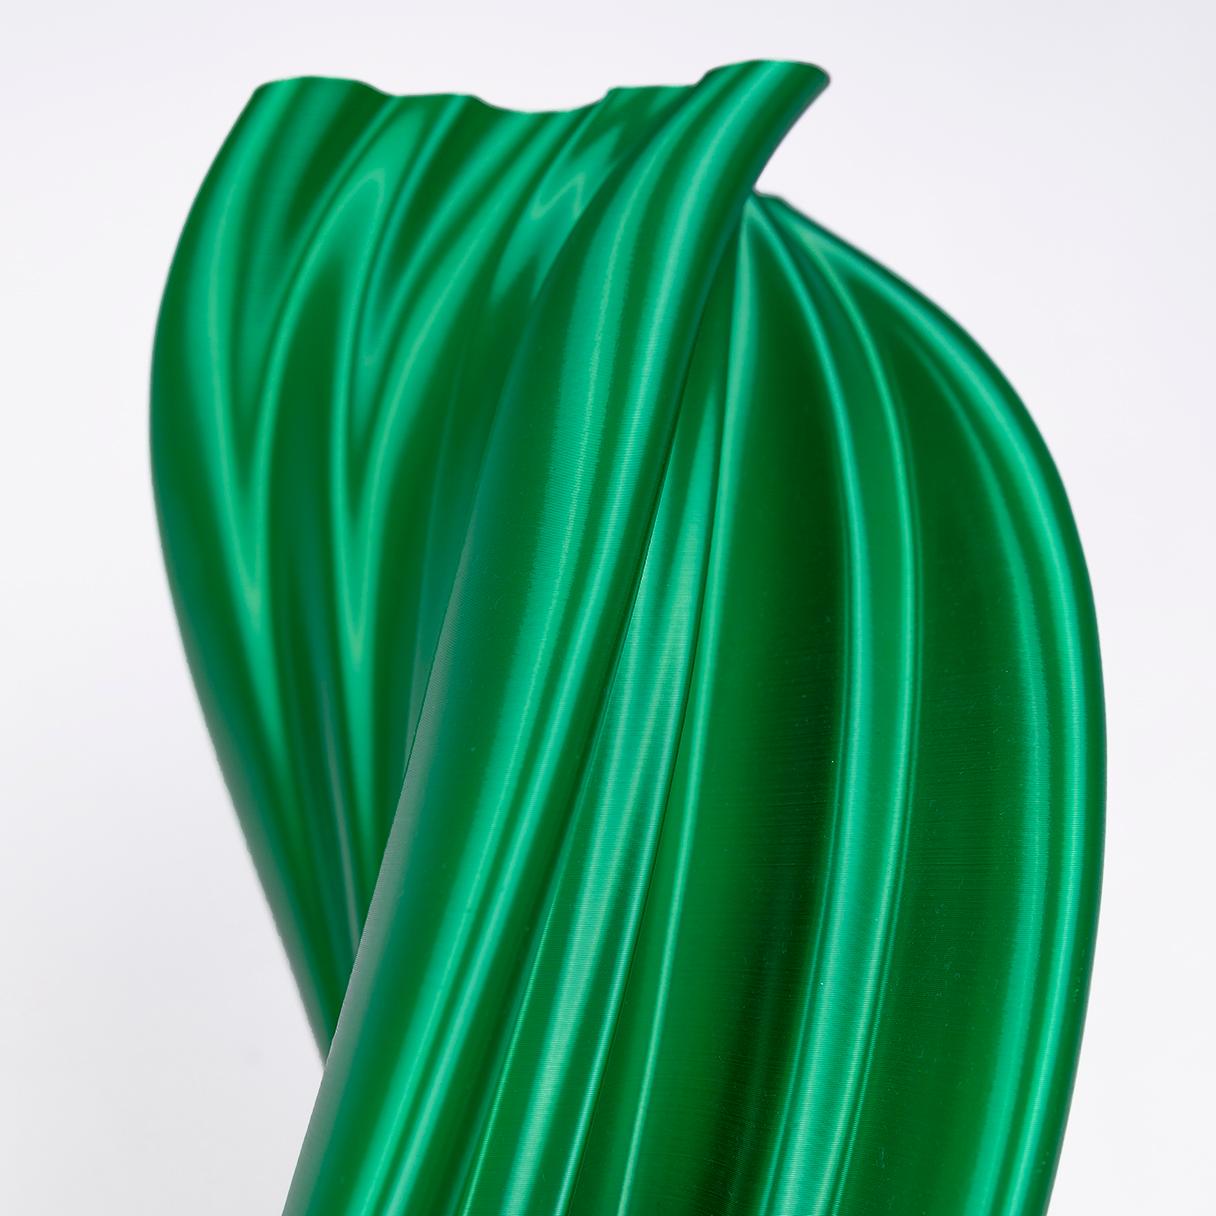 Damocle, Green Contemporary Sustainable Vase-Sculpture 3